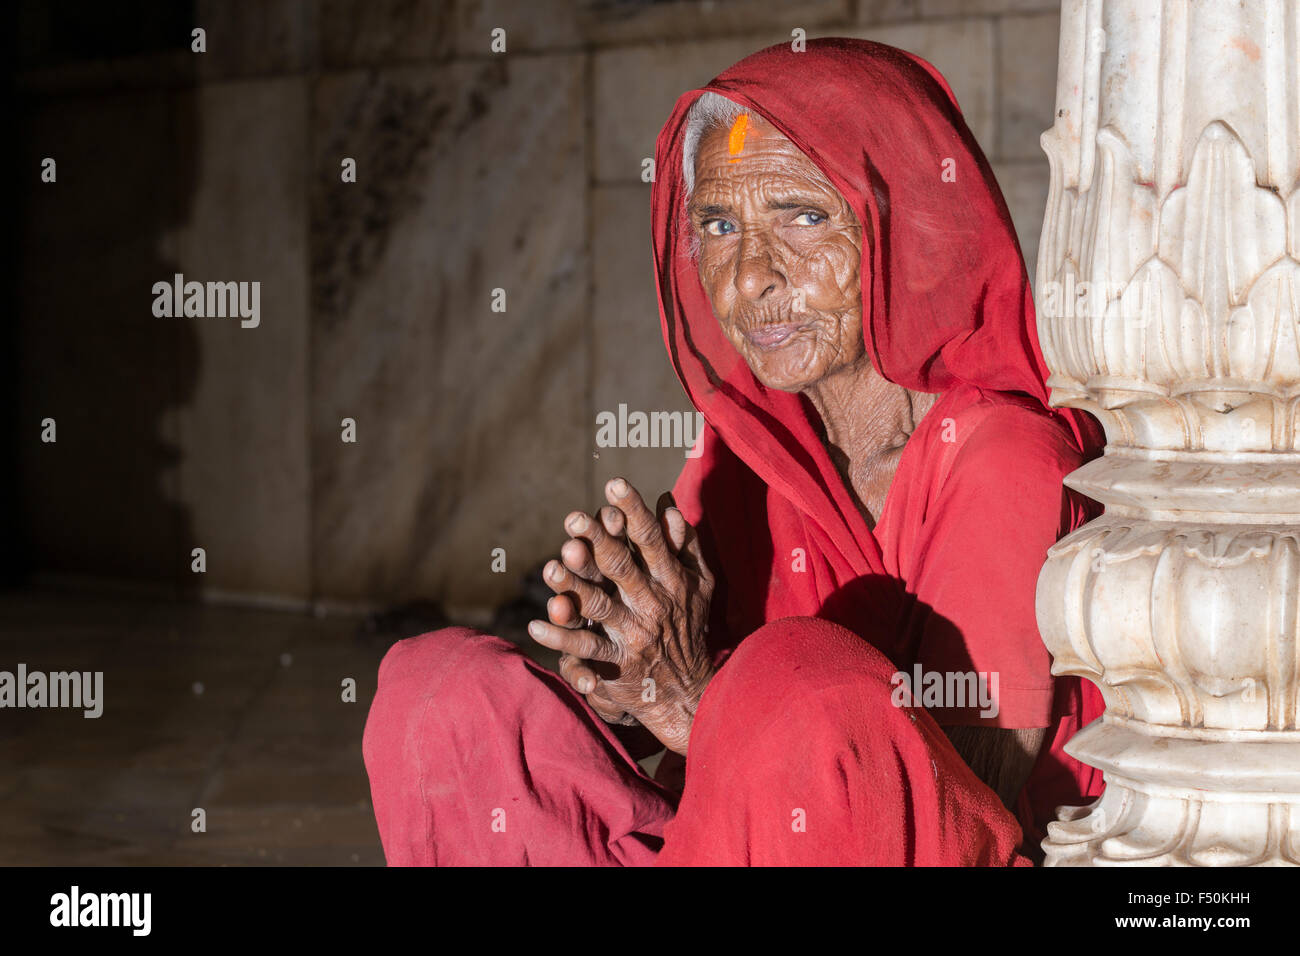 An old woman, dressed in a red sari, is praying inside Karni Mata Temple, a  famous Hindu temple dedicated to Karni Mata. It is a Stock Photo - Alamy